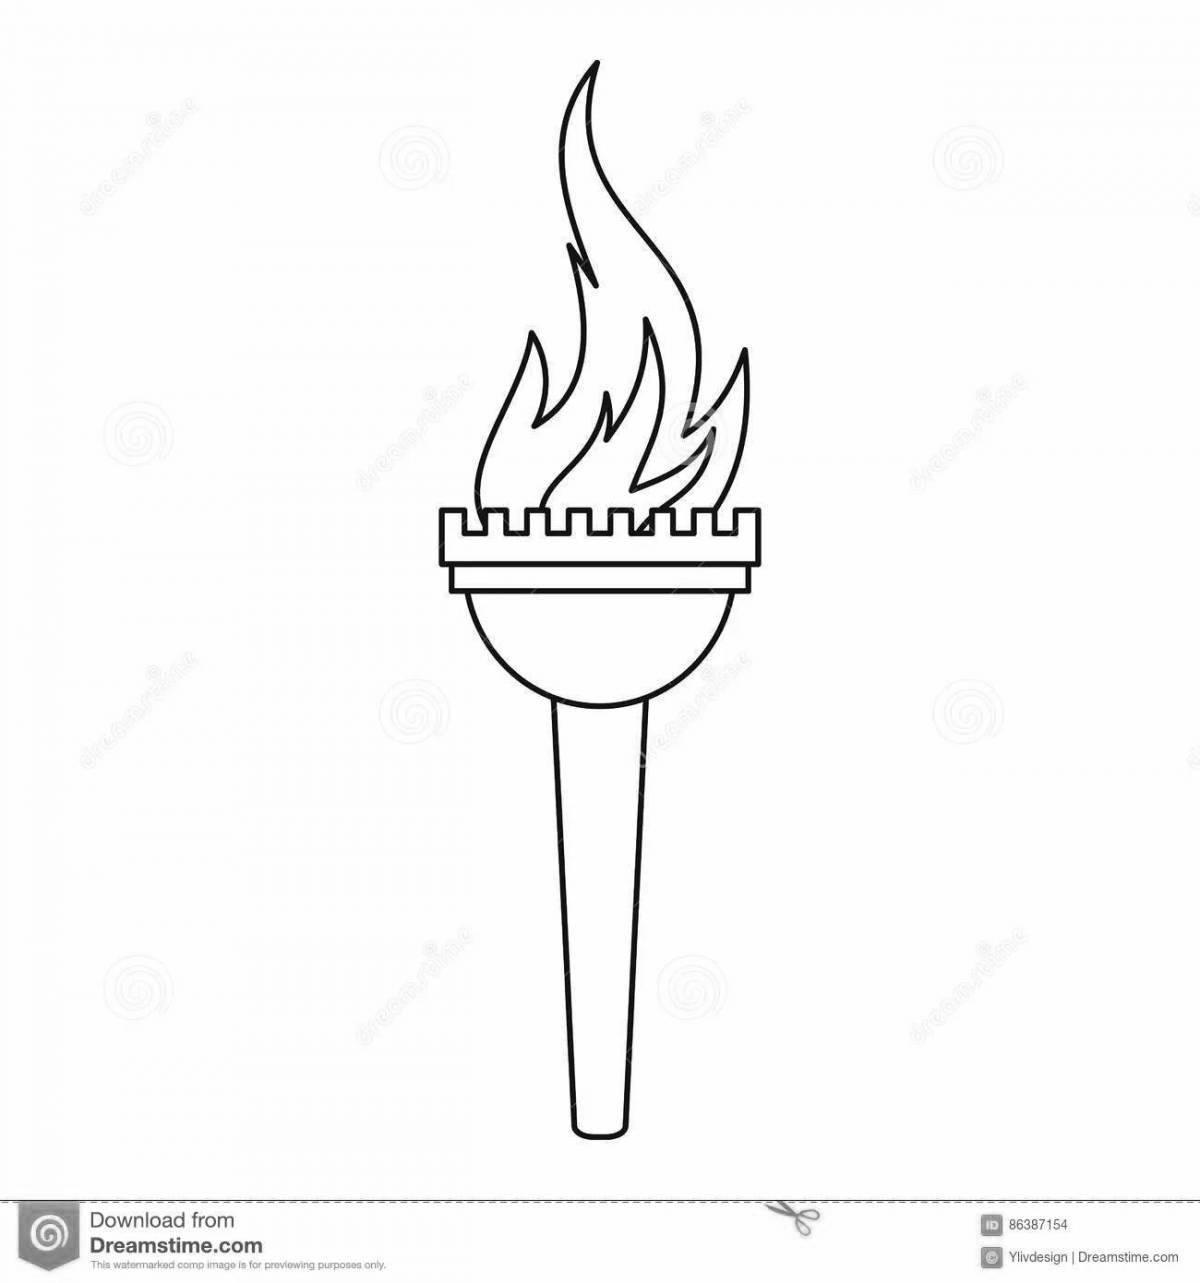 Dramatic torch coloring pages for kids